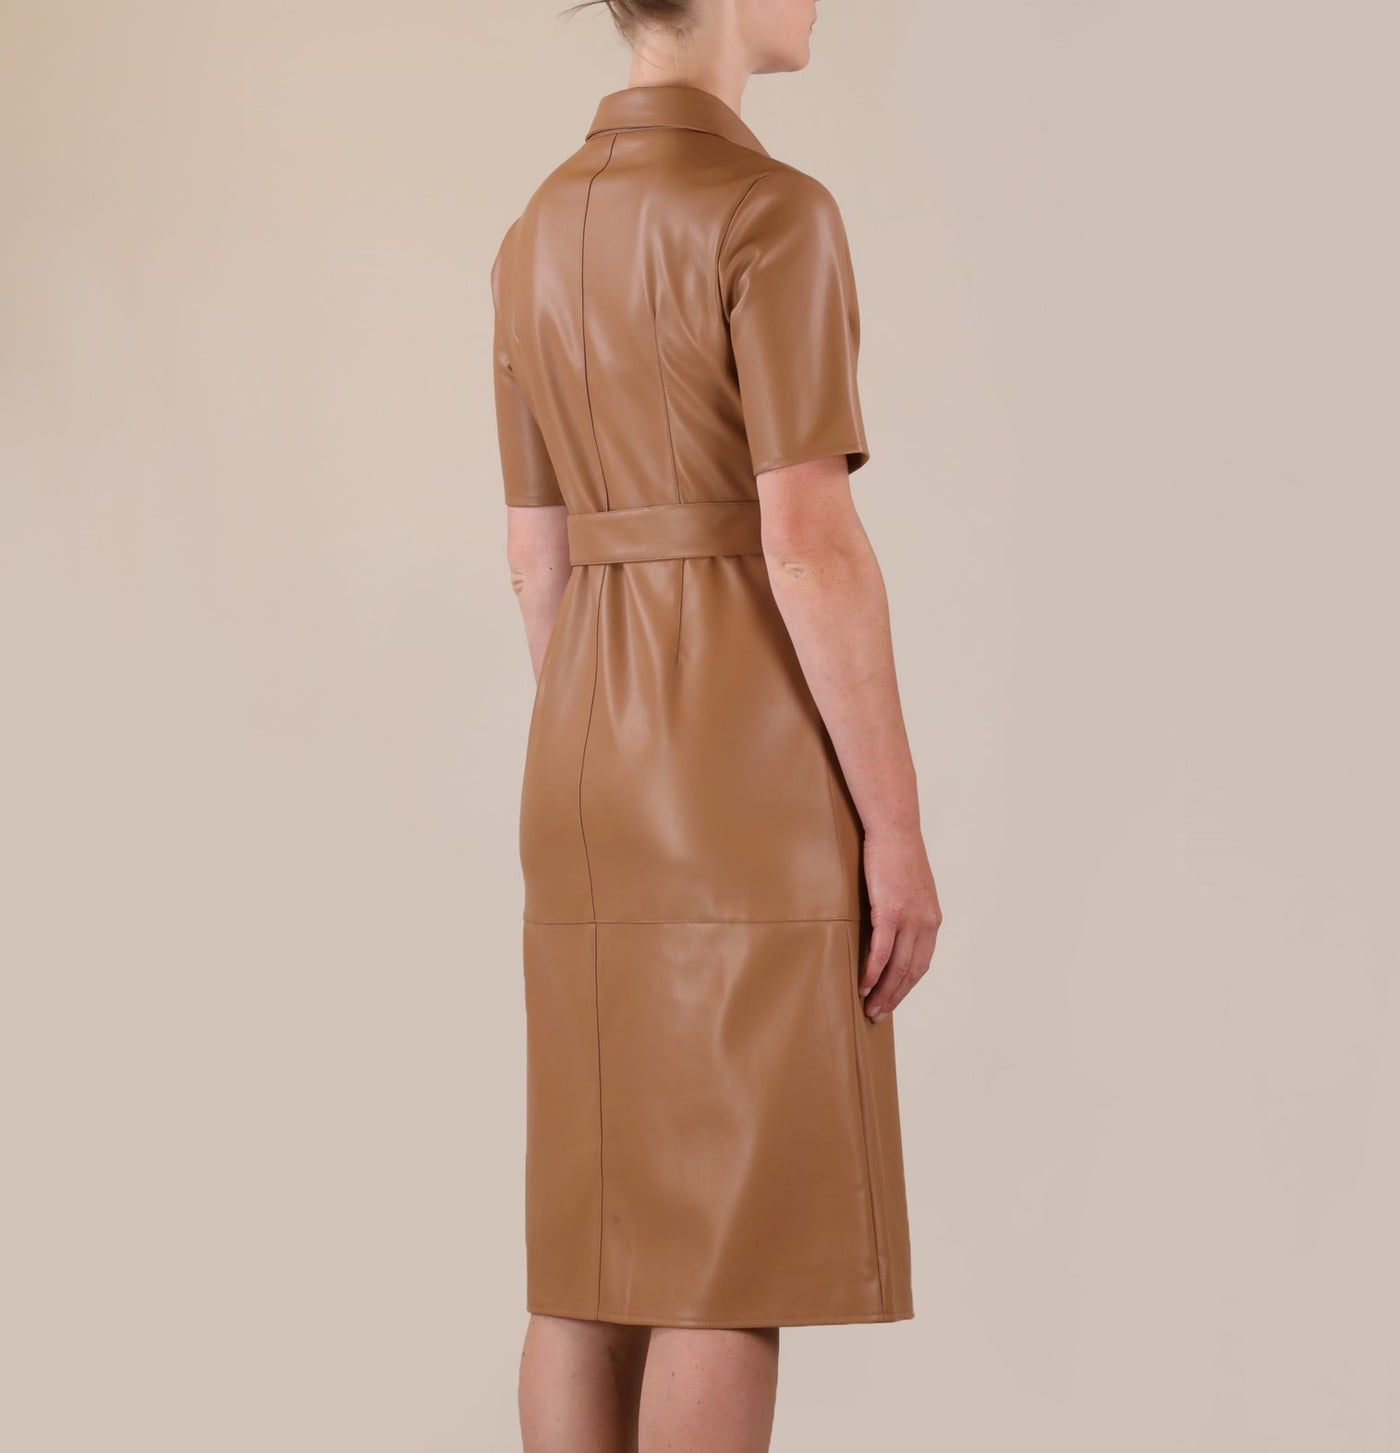 Dress leatherlook  Pacey.750S21 Toasted nut